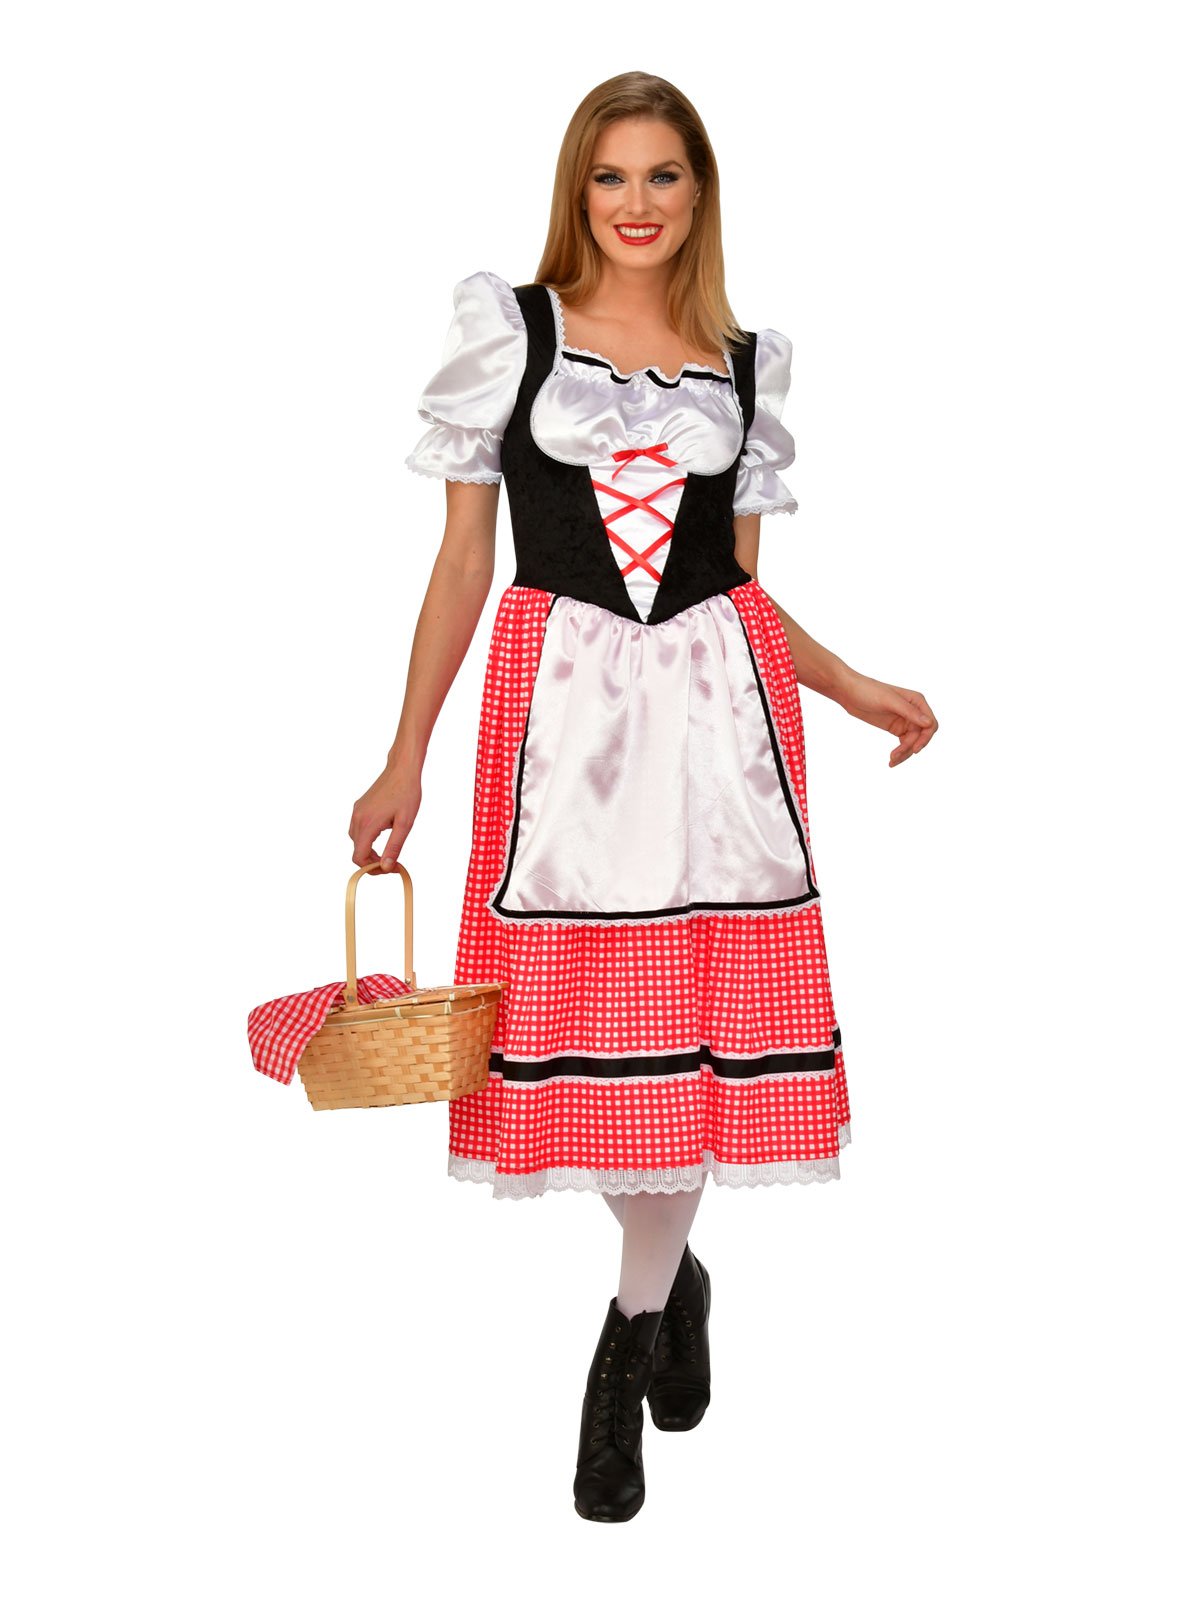 Costume Adult Red Riding Hood Small